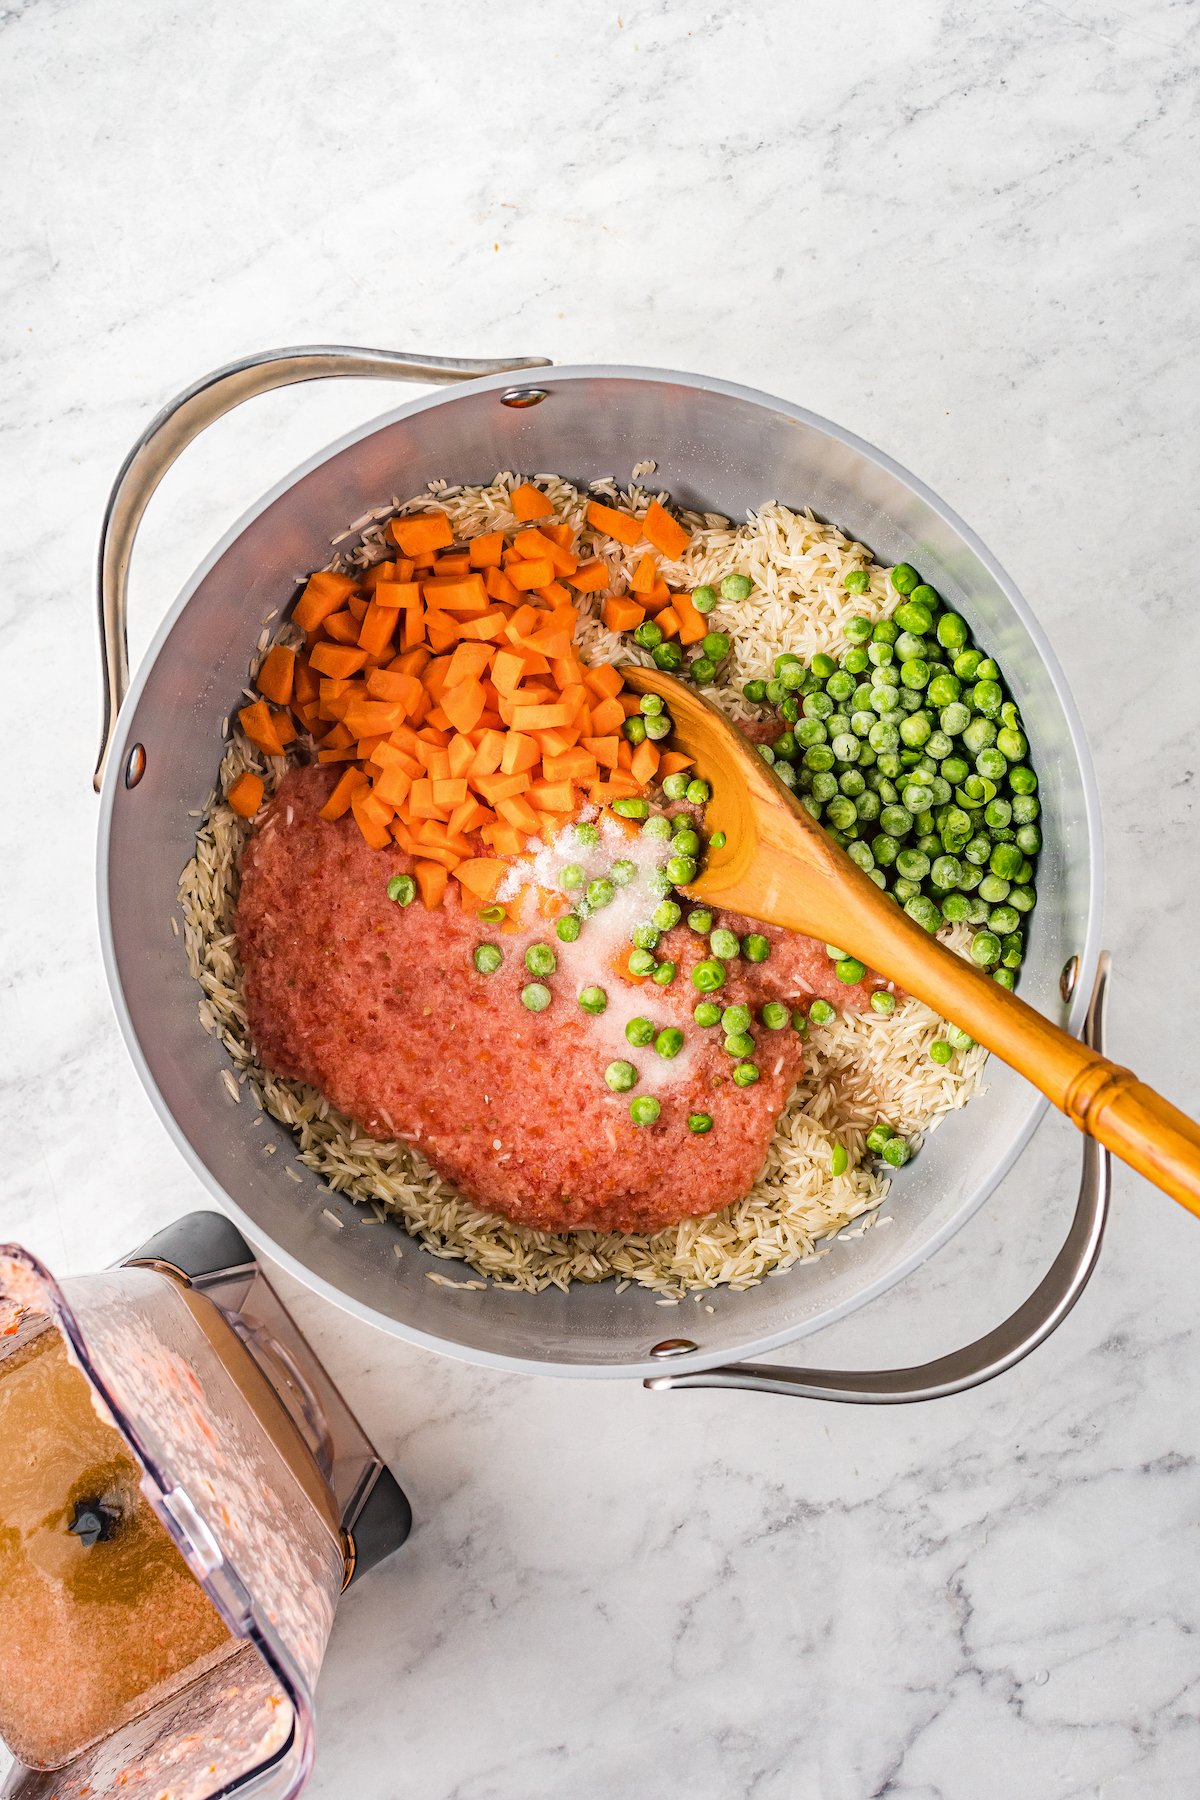 Toasted rice, tomato puree, carrots, and peas cooking in a saucepan.